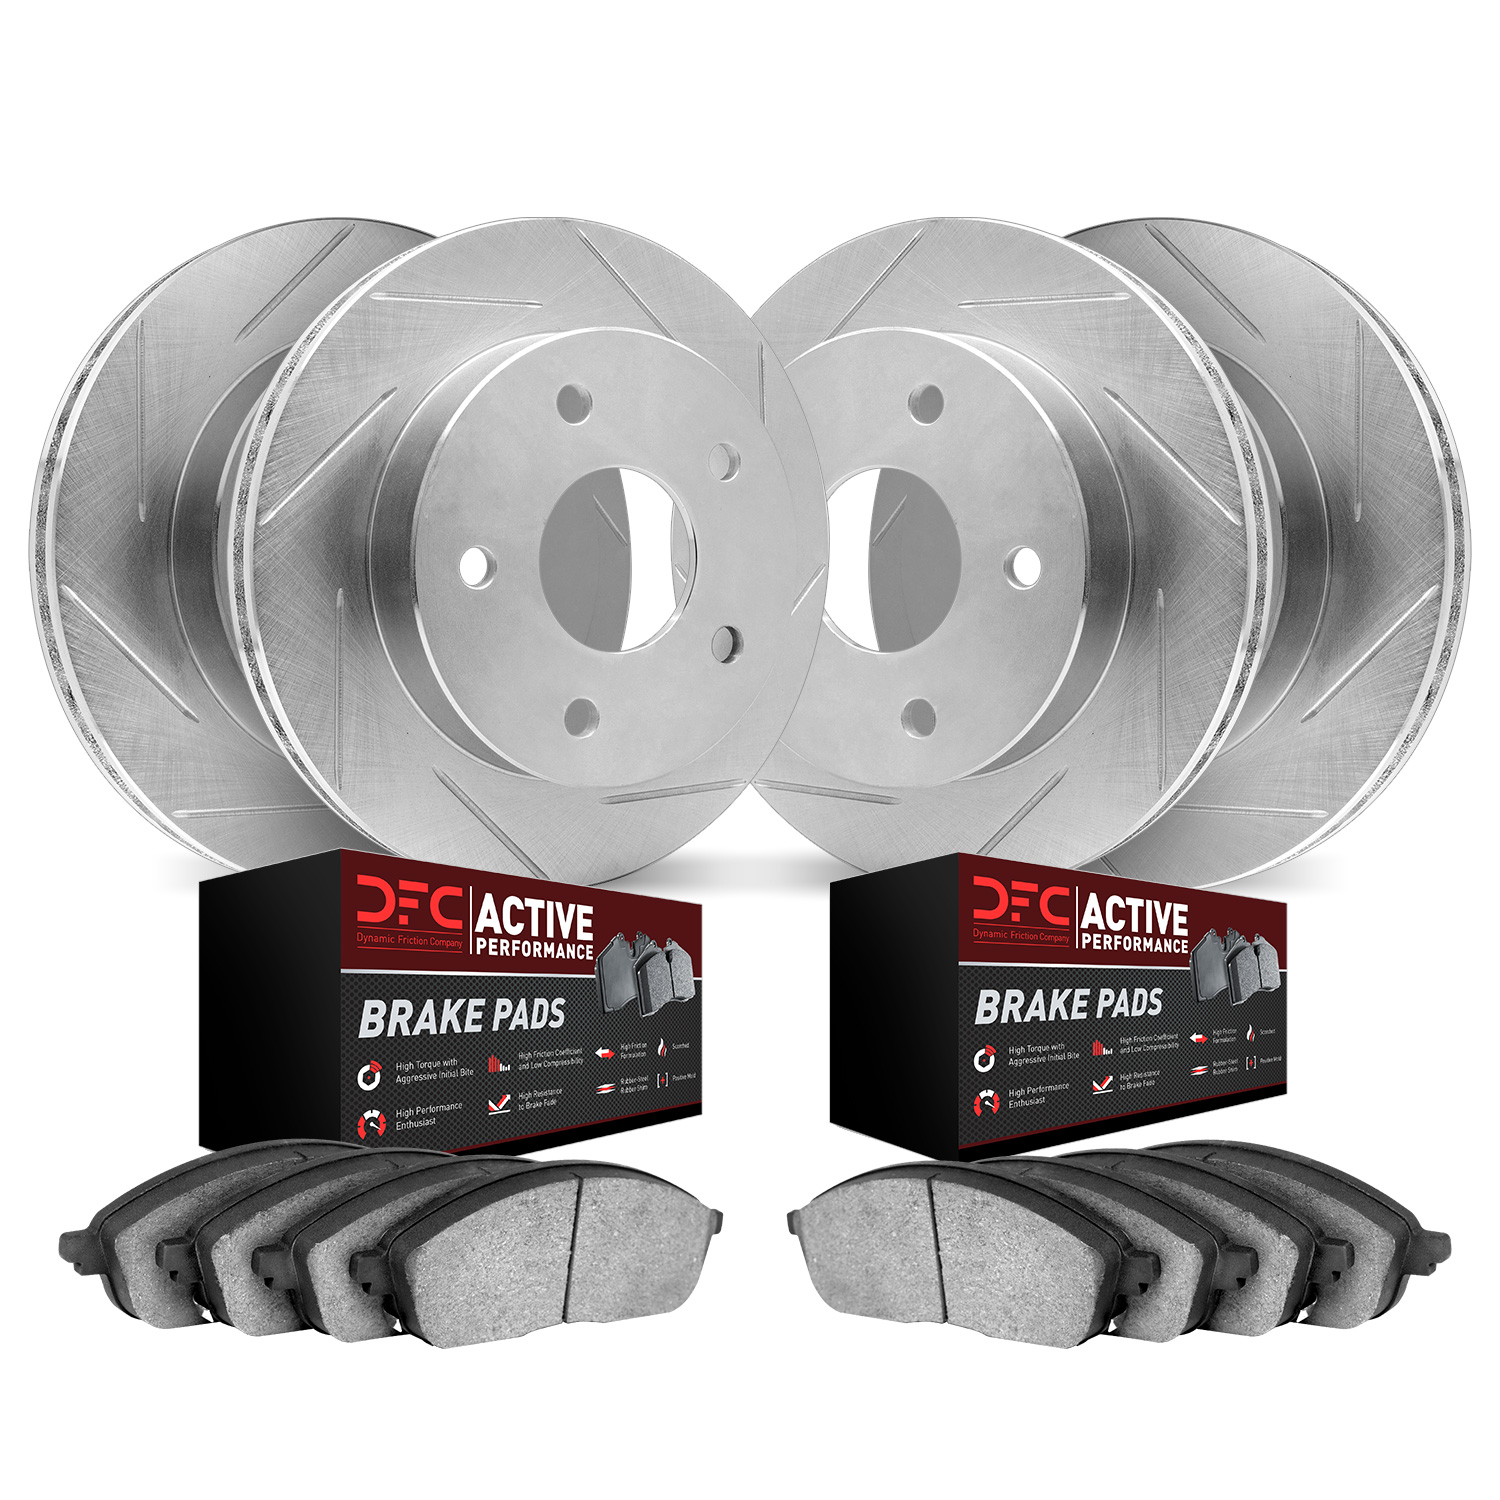 2704-47012 Geoperformance Slotted Brake Rotors with Active Performance Pads Kits, 2006-2013 GM, Position: Front and Rear